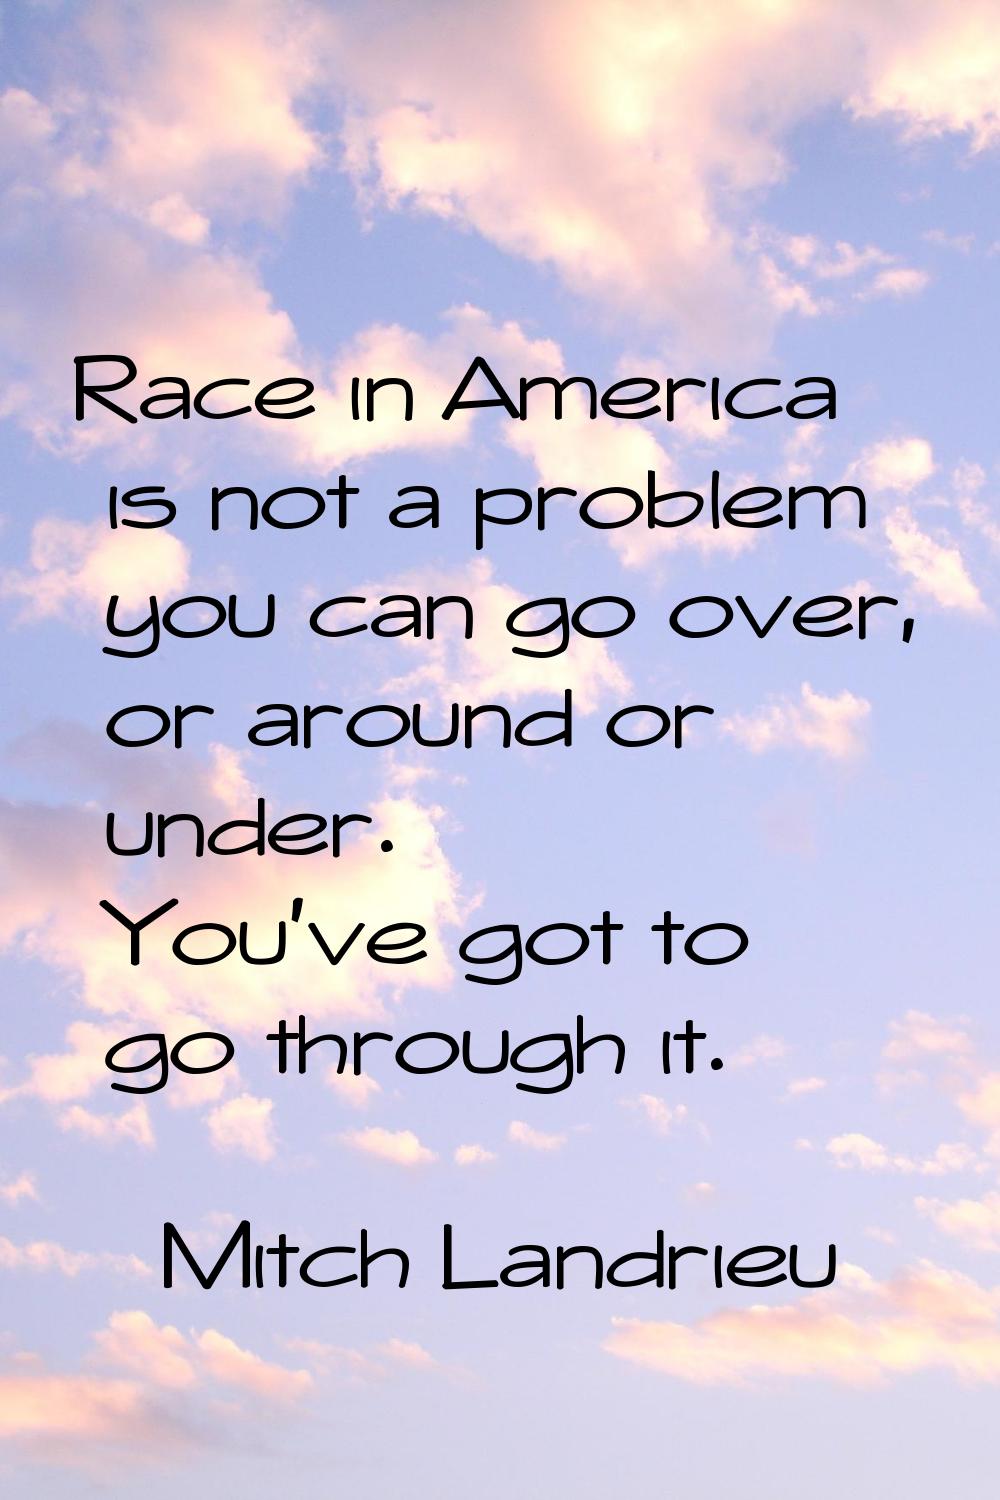 Race in America is not a problem you can go over, or around or under. You've got to go through it.